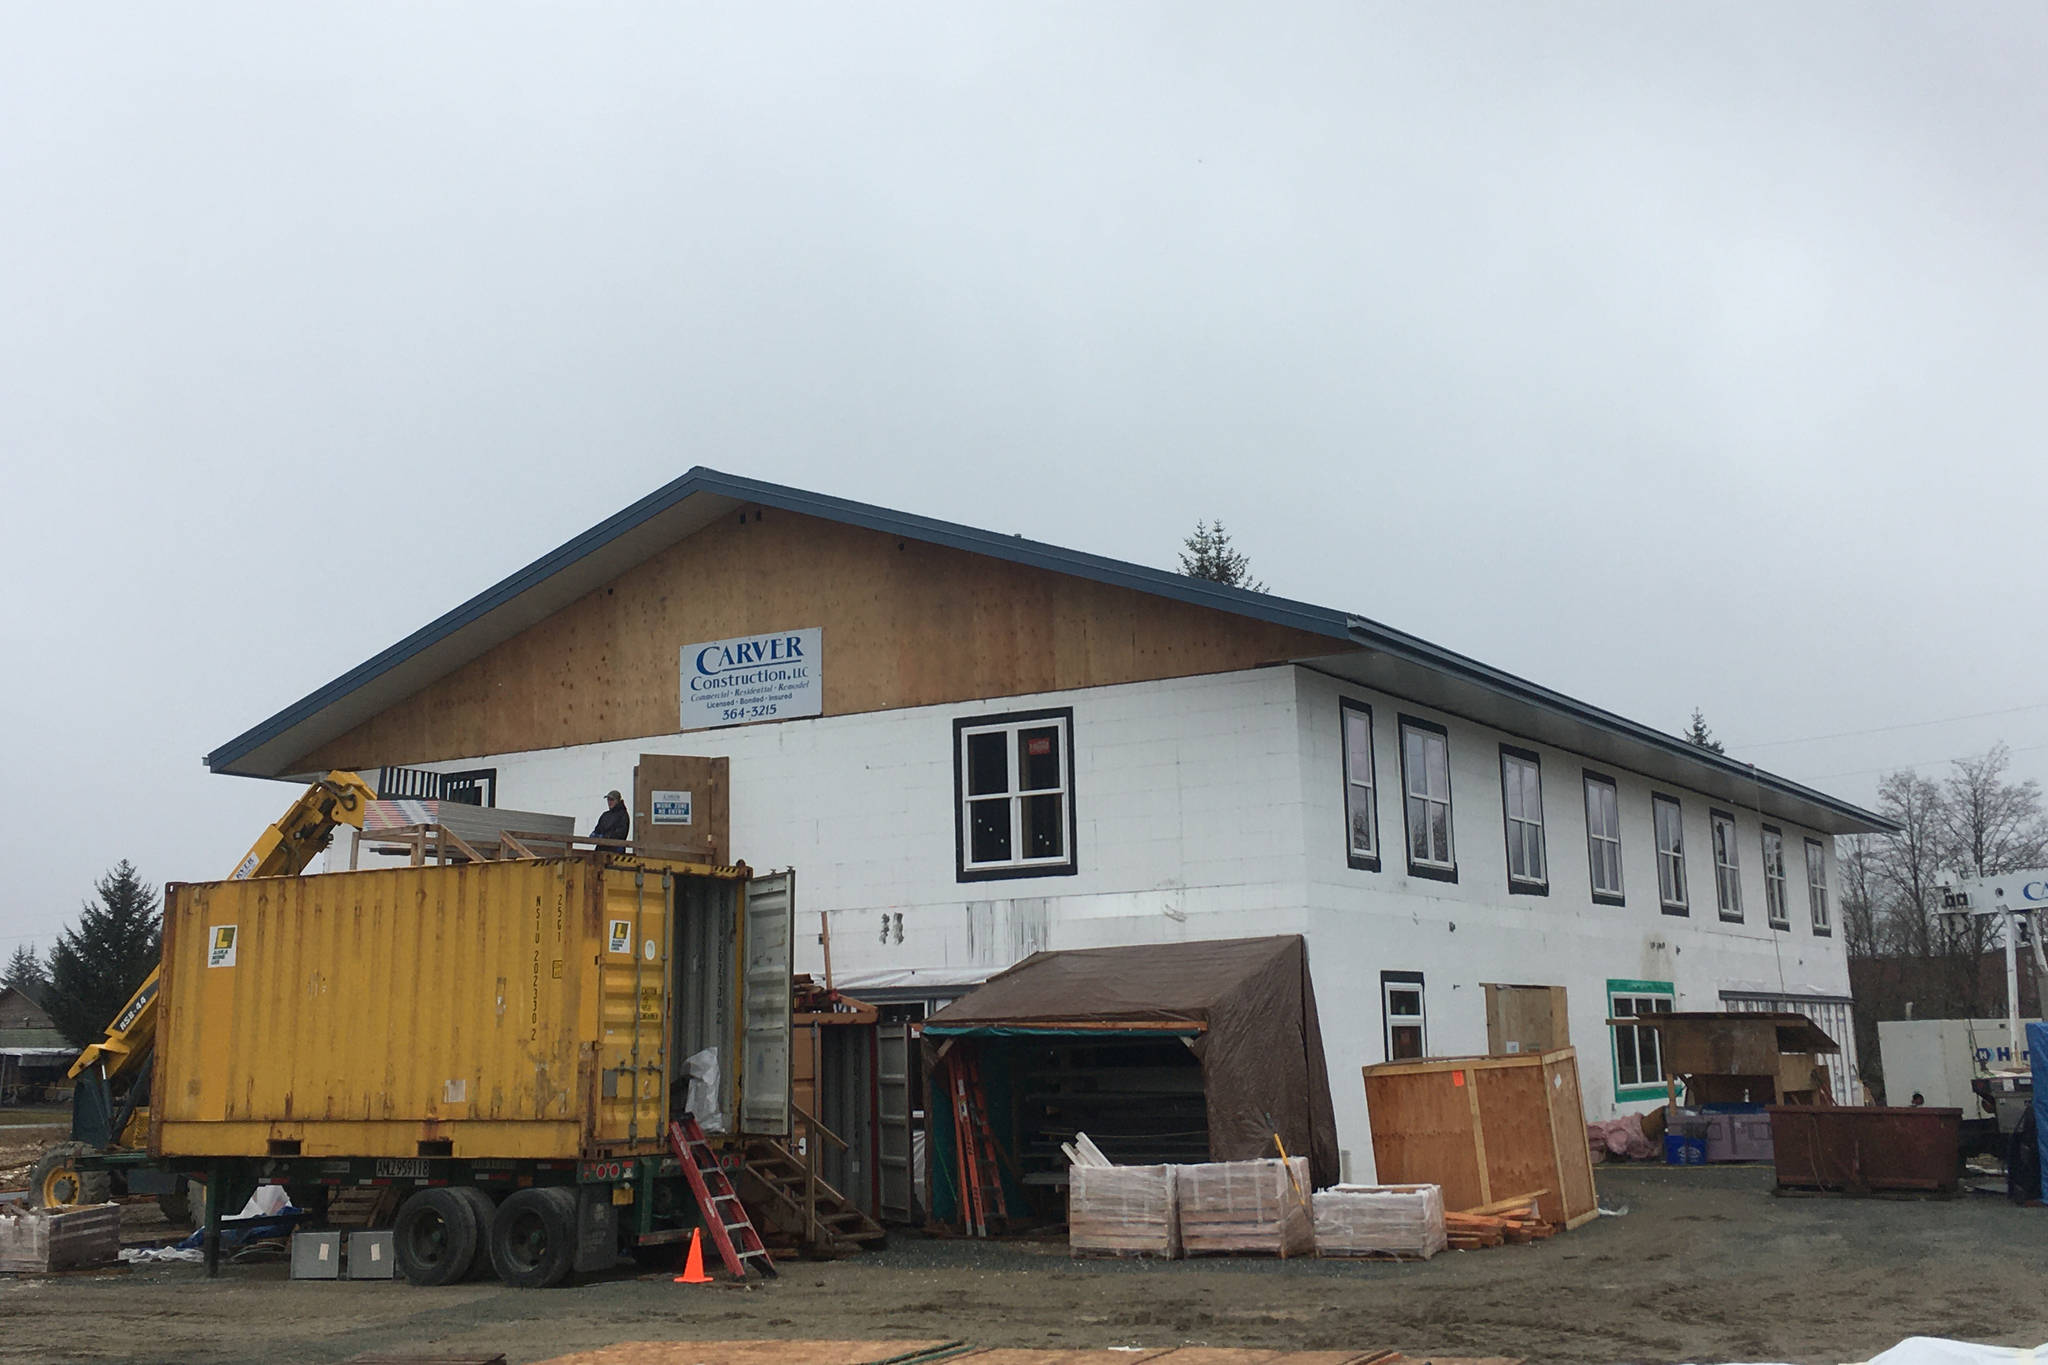 The new Glory Hall, currently under construction near the airport, is due to open on July 1, 2021, as the contract for the shelter at the Juneau Arts and Culture Center ends after a year and a half of pandemic. (Michael S. Lockett / Juneau Empire)